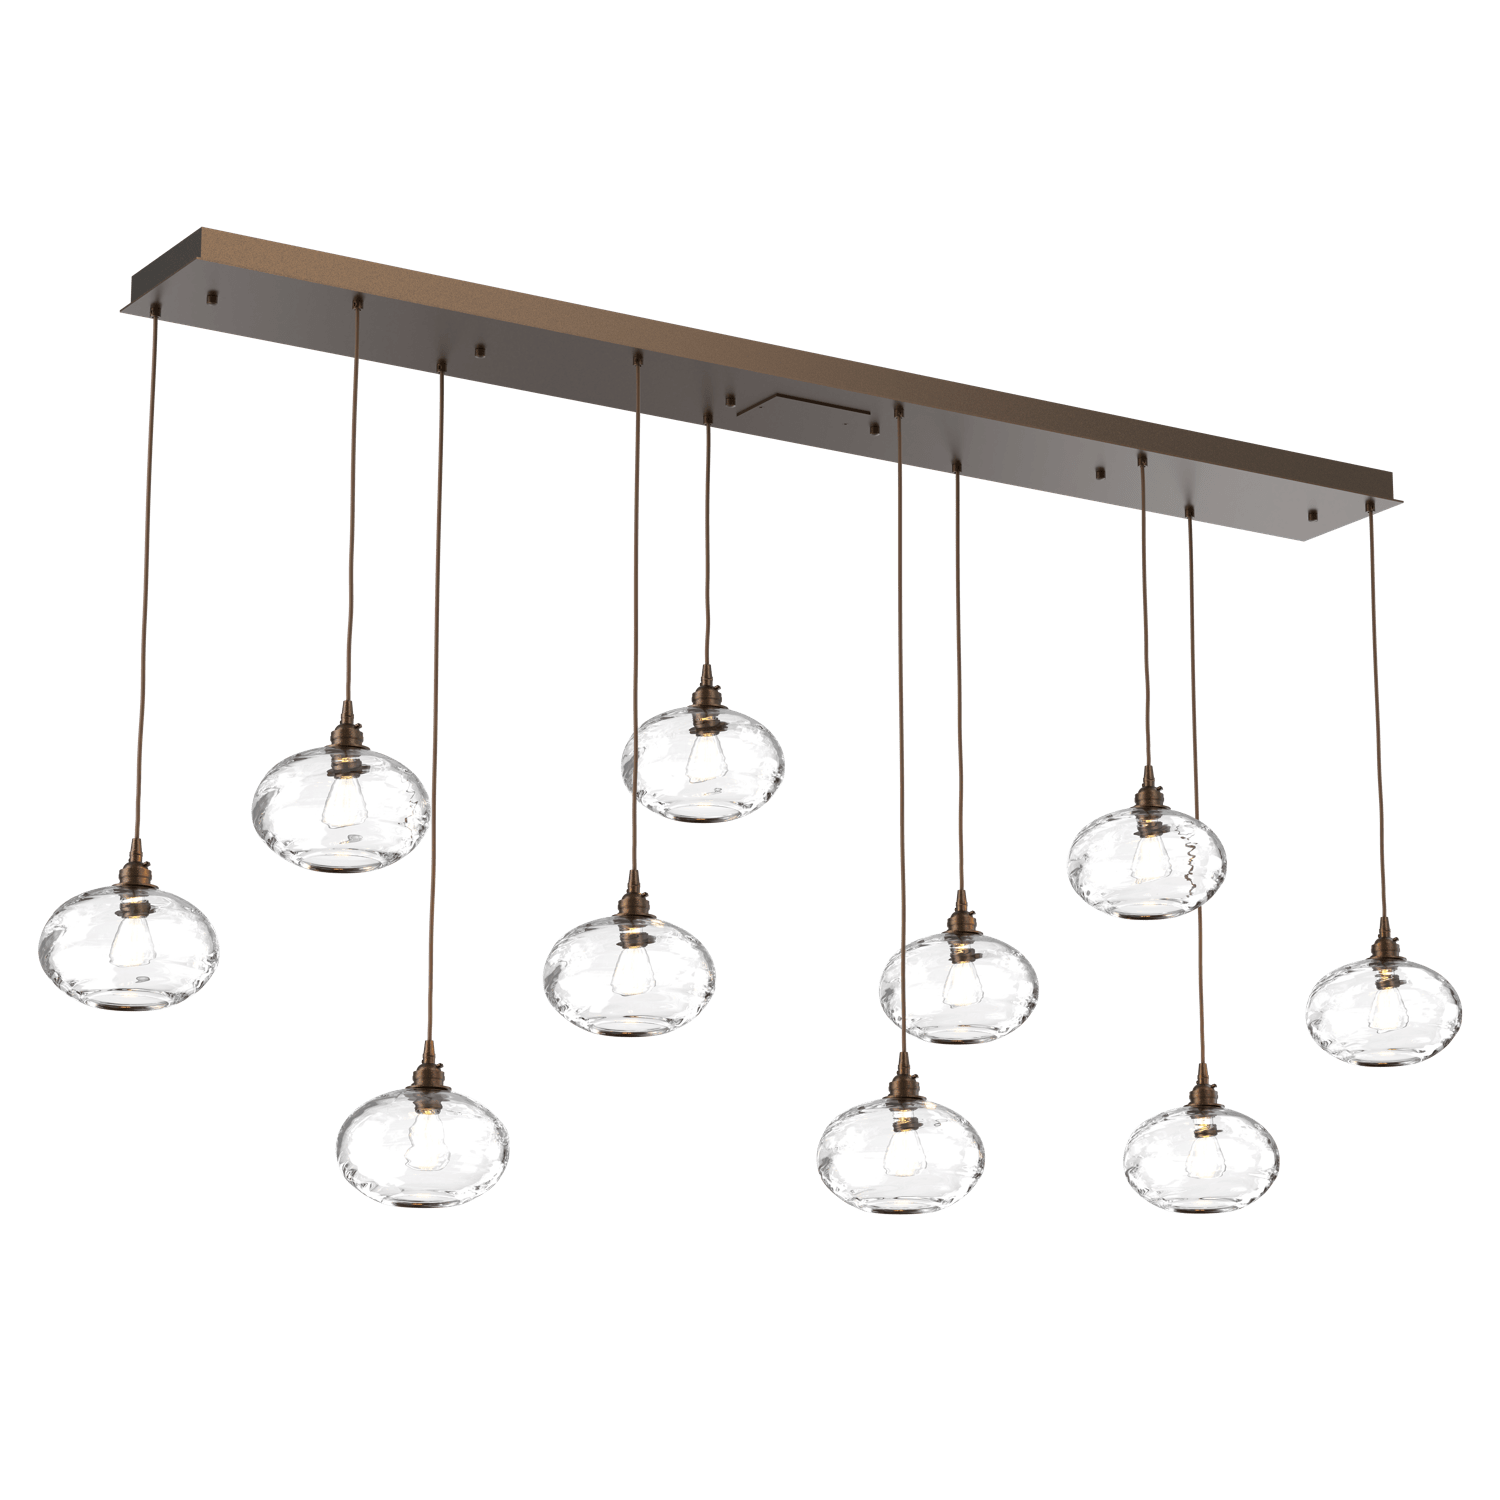 PLB0036-10-FB-OC-Hammerton-Studio-Optic-Blown-Glass-Coppa-10-light-linear-pendant-chandelier-with-flat-bronze-finish-and-optic-clear-blown-glass-shades-and-incandescent-lamping